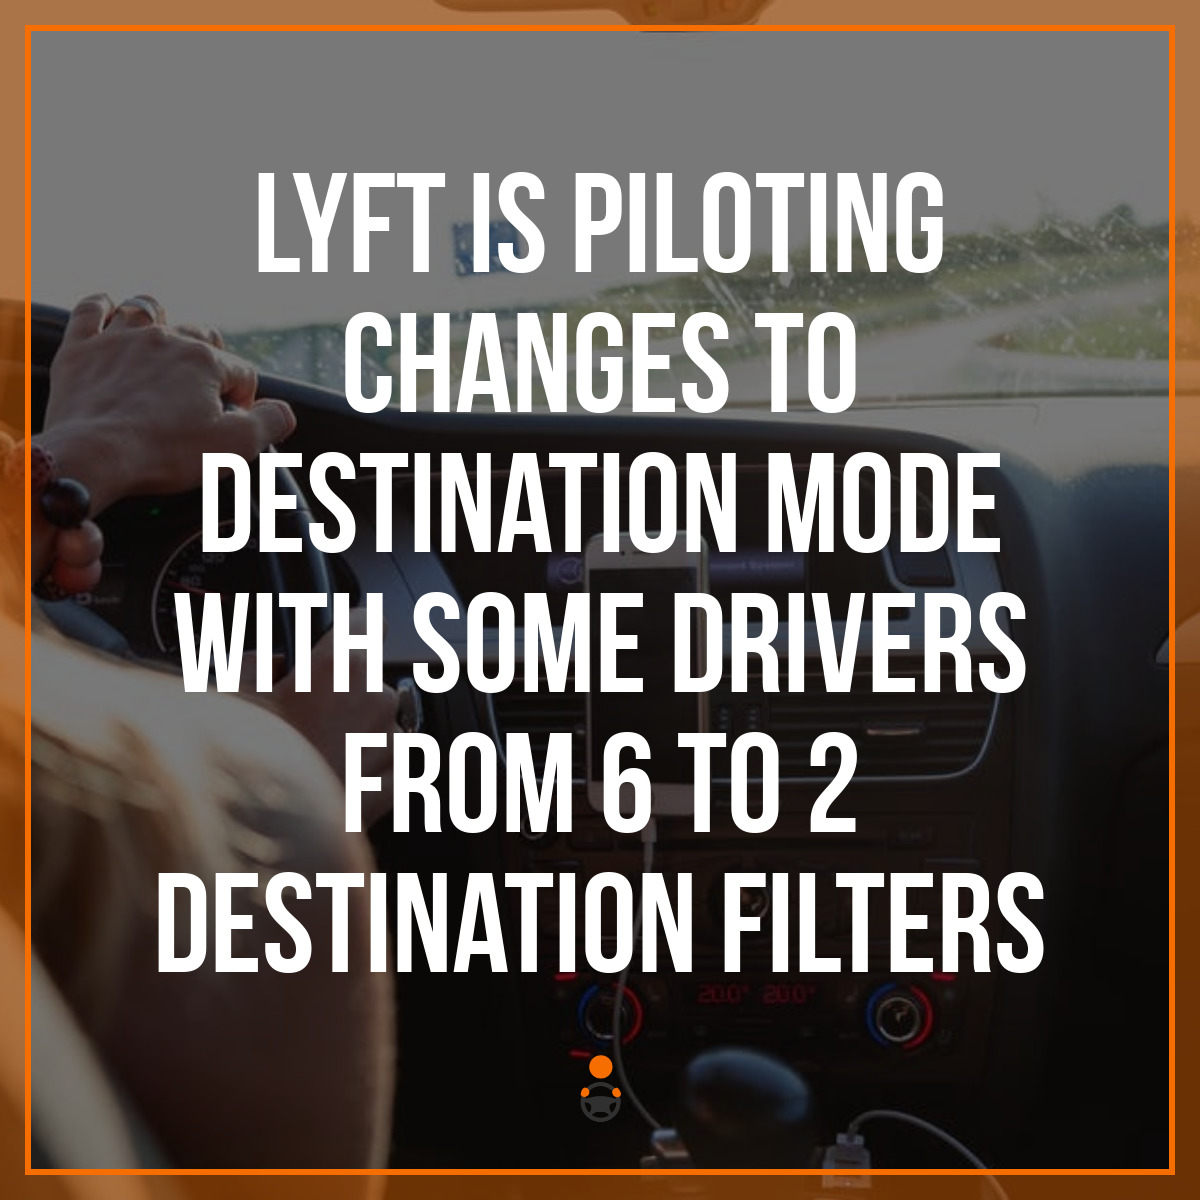 Lyft is Piloting Changes to Destination Mode With Some Drivers from 6 to 2 Destination Filters